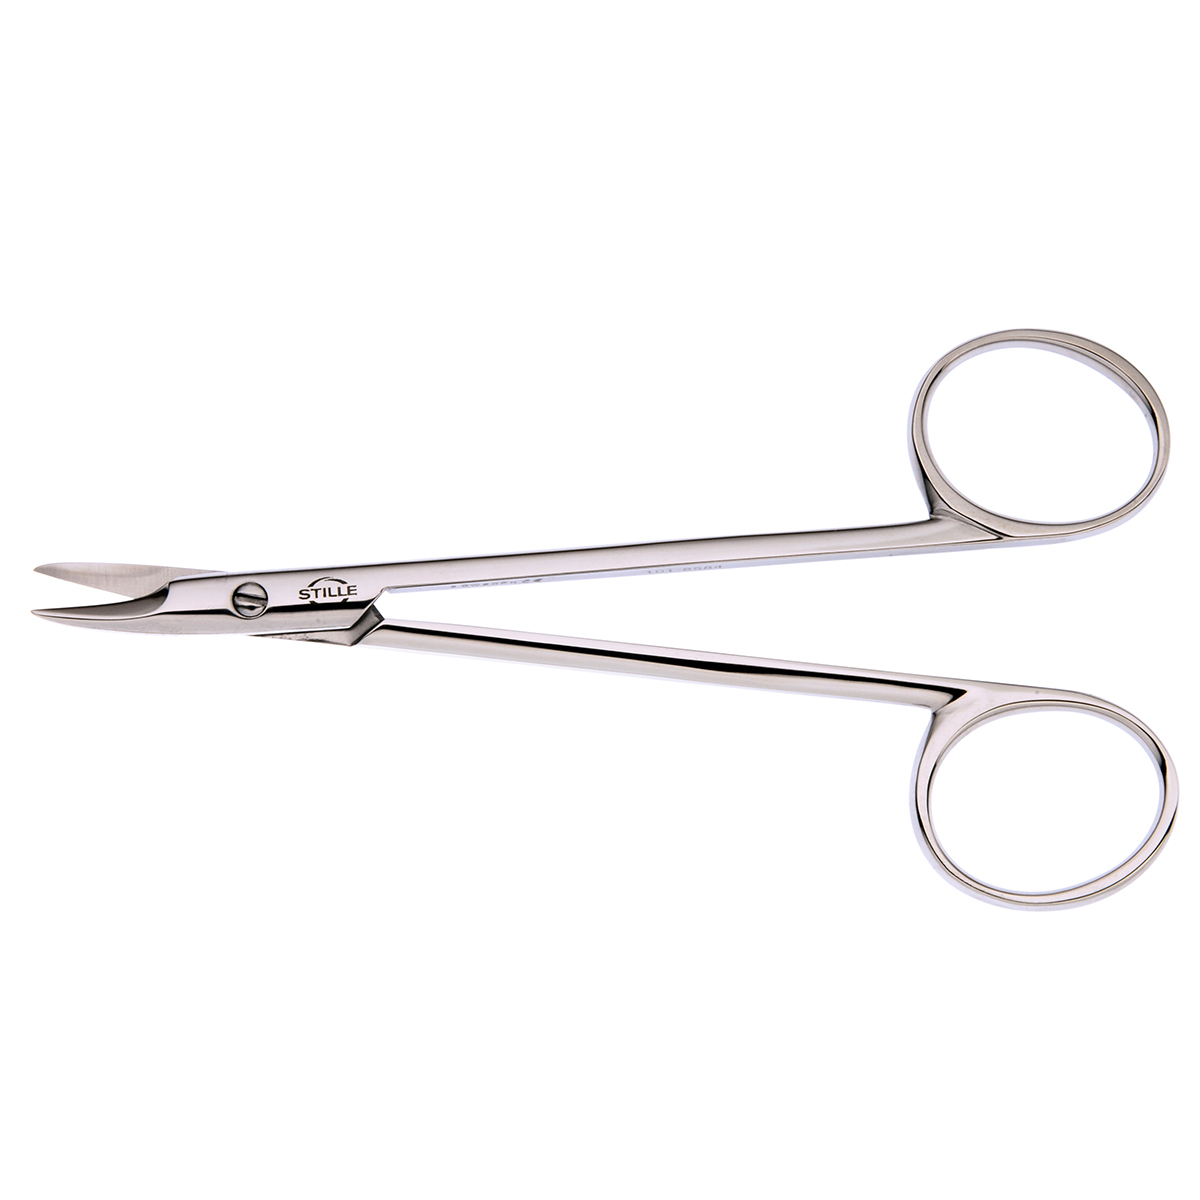 Konig MDS4431425 Jacobson Micro Scissors, ANG 25°, 7 For Sale